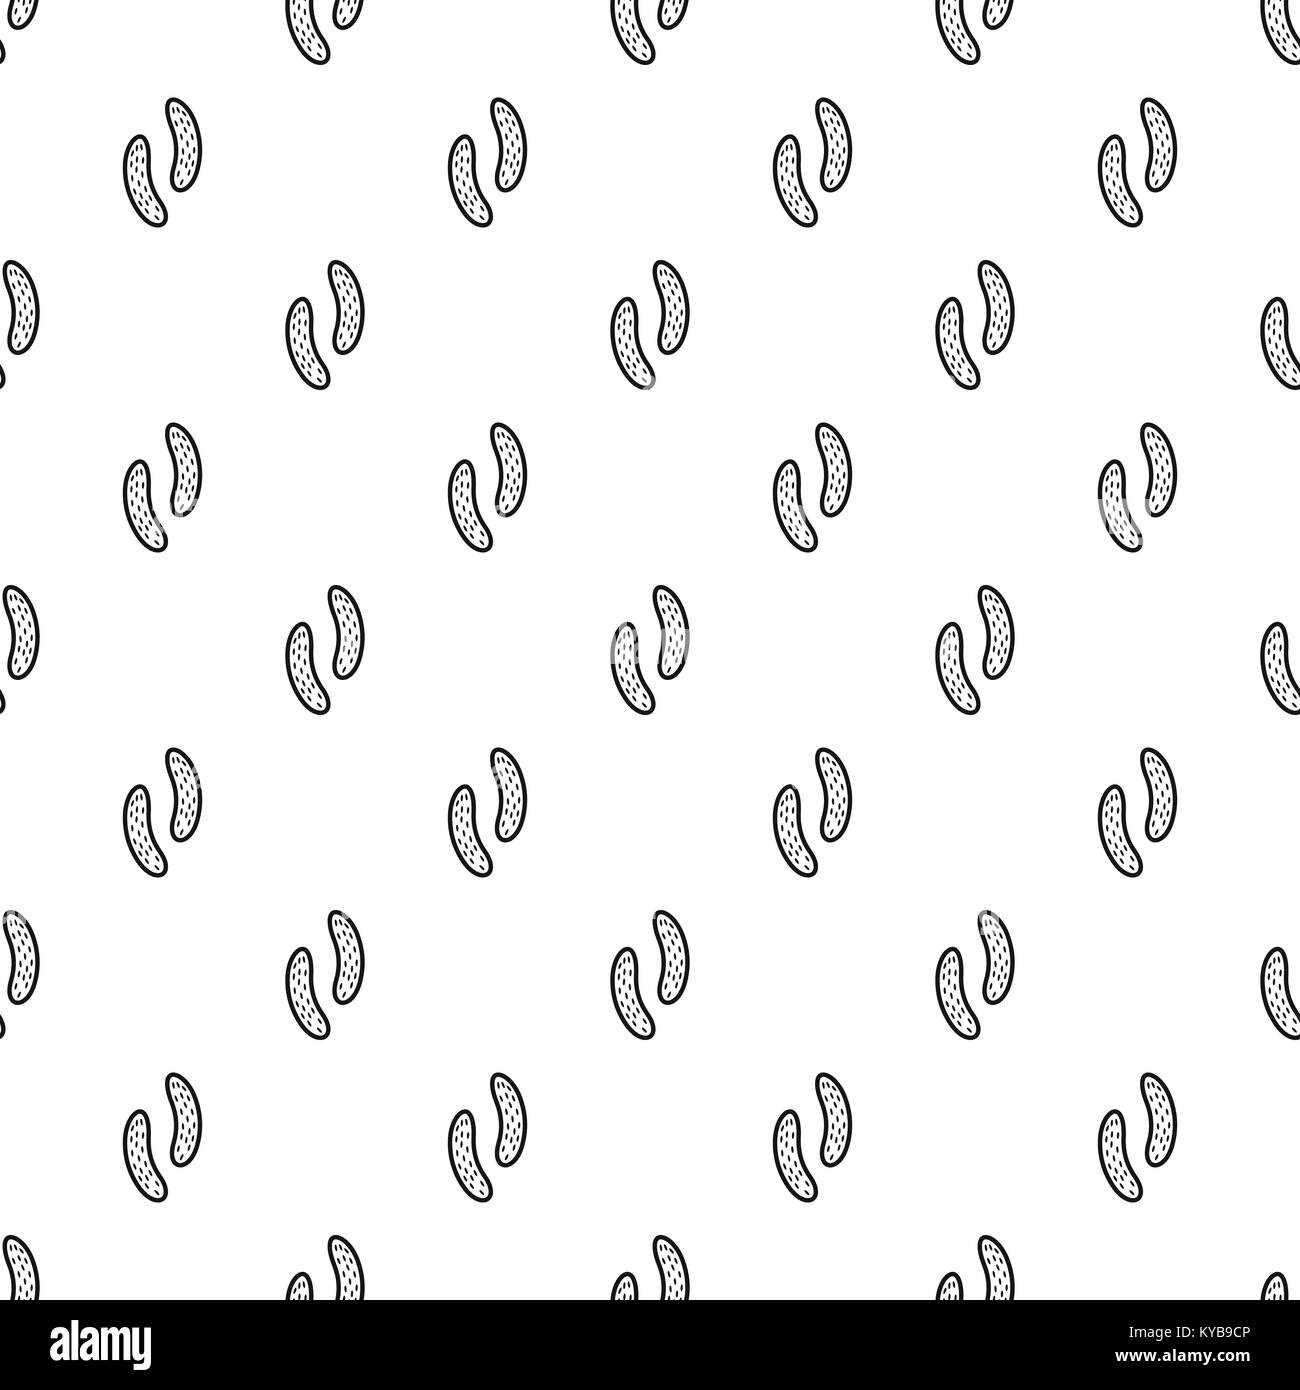 Epithelial cell pattern vector Stock Vector